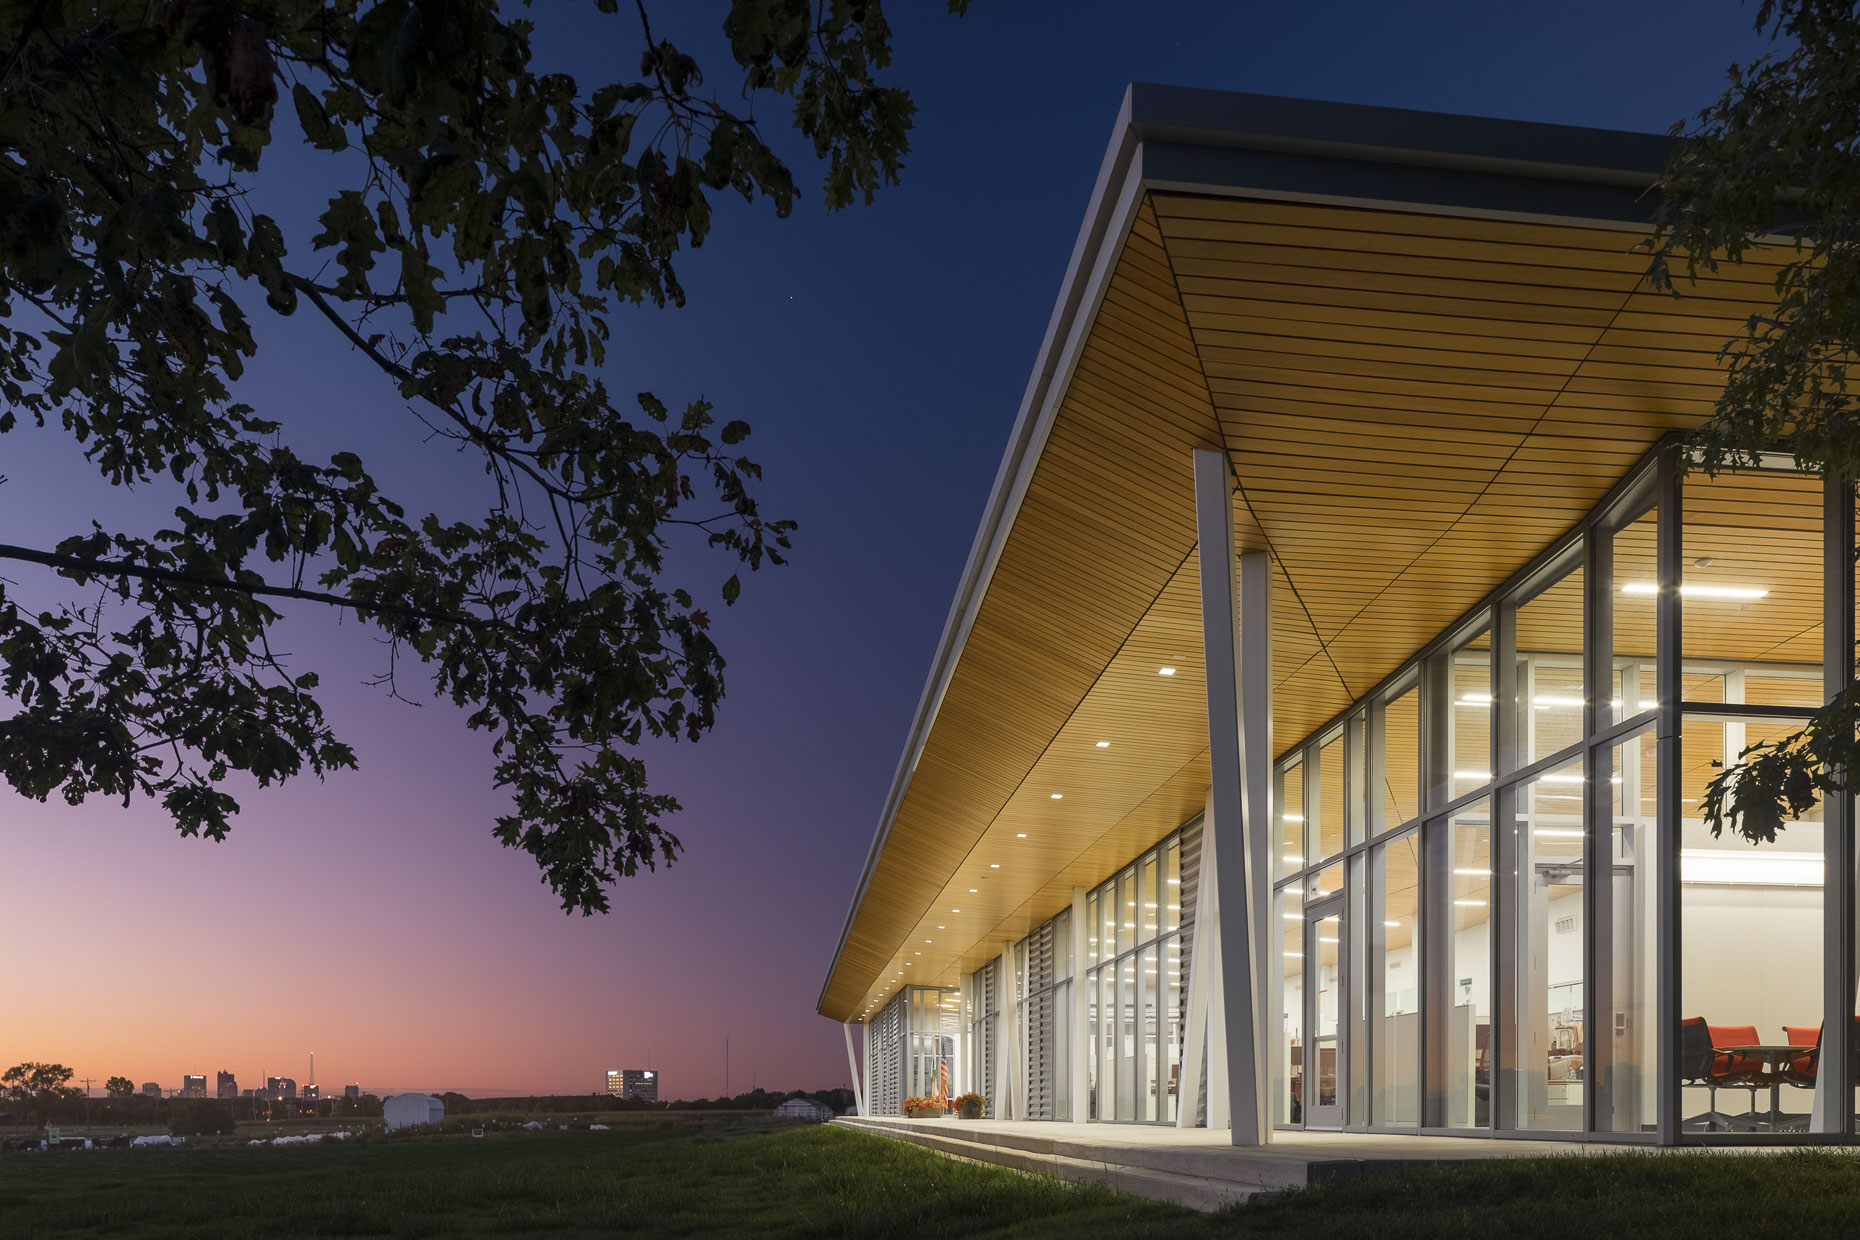 The Ohio State University Franklin County Extension Kunz-Brundige Building by Erdy McHenry photographed by Brad Feinknopf based in Columbus, Ohio